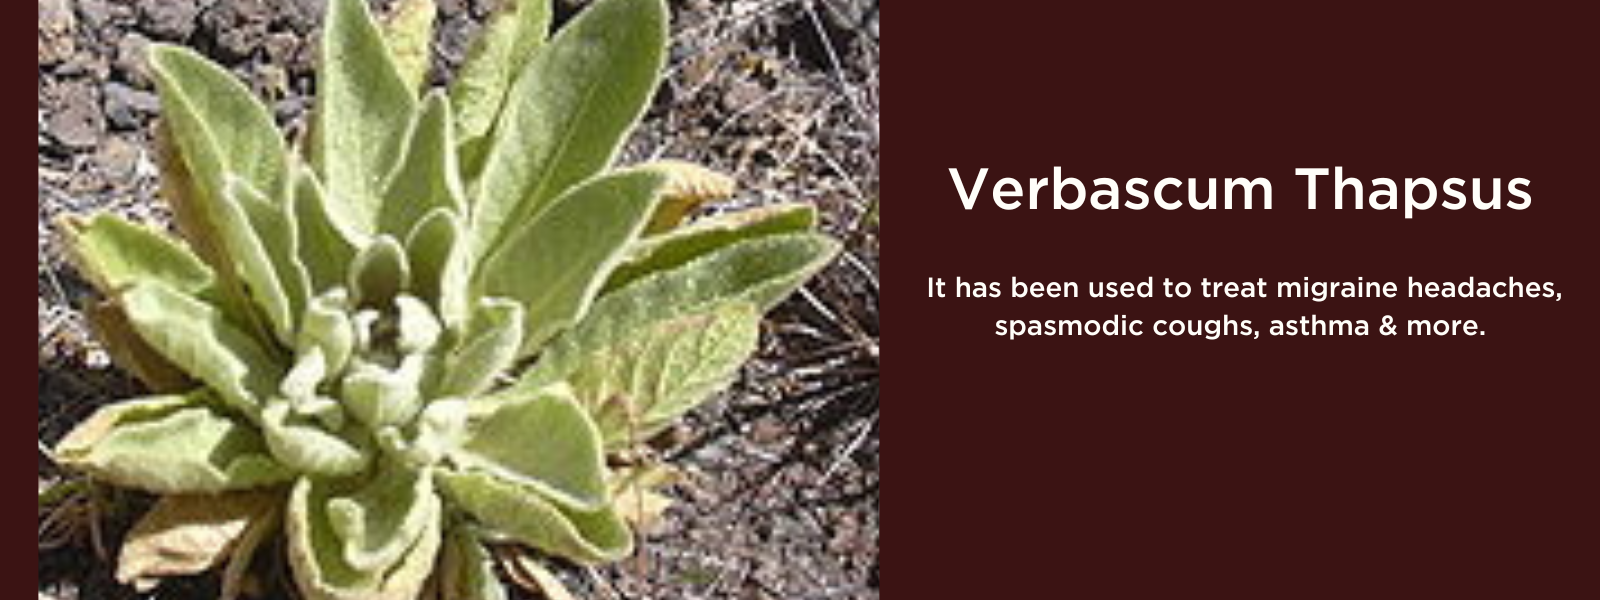 Verbascum thapsus - Health Benefits, Uses and Important Facts